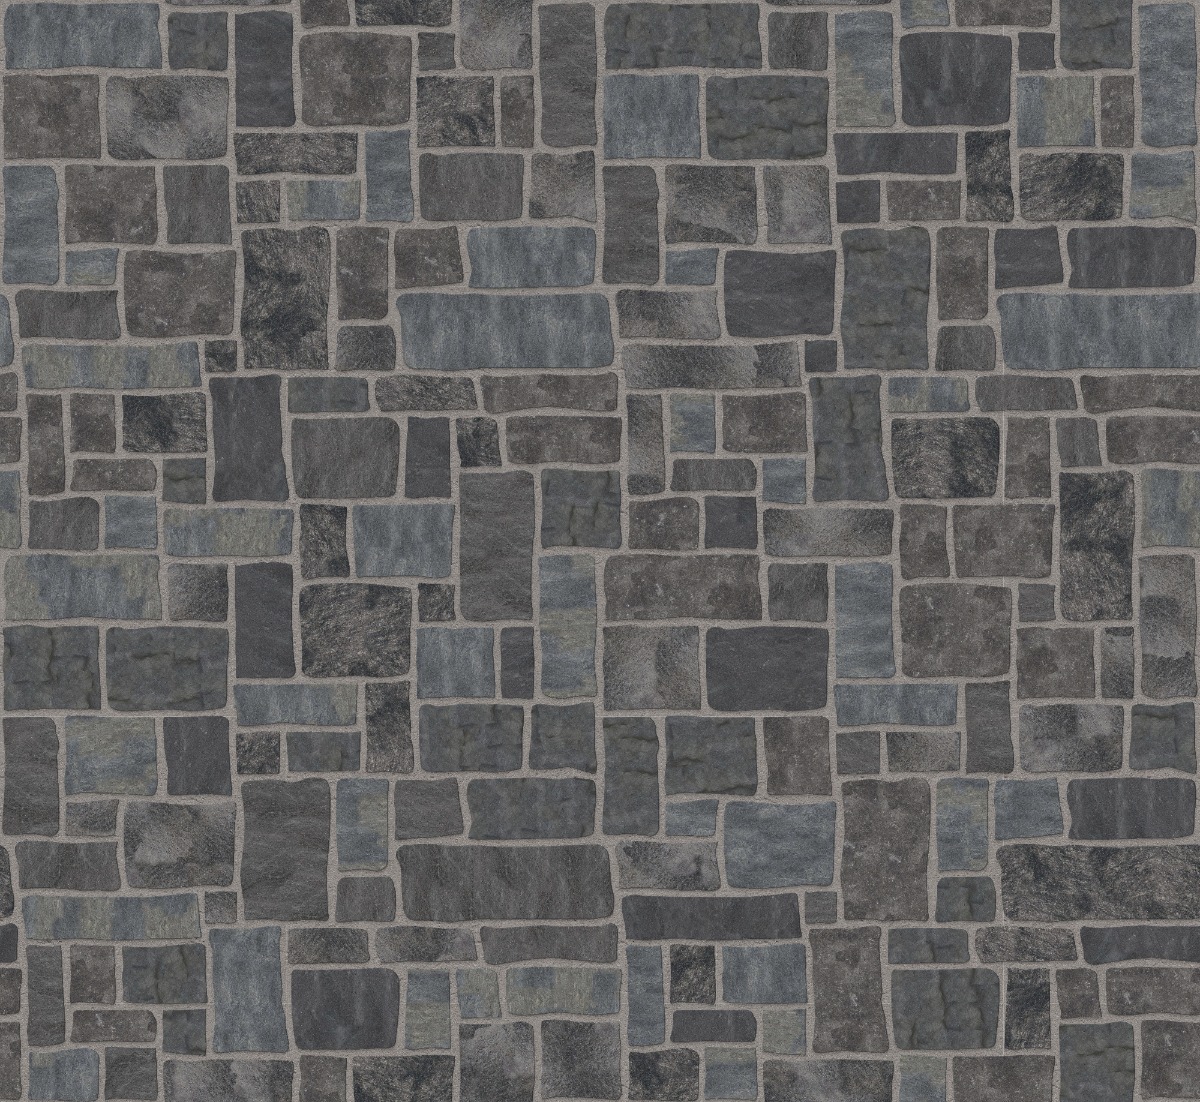 A seamless stone texture with granite - raven hill - split-face seam face surface - m749 blocks arranged in a Rough-Edge Squares & Rectangles - DP082 pattern